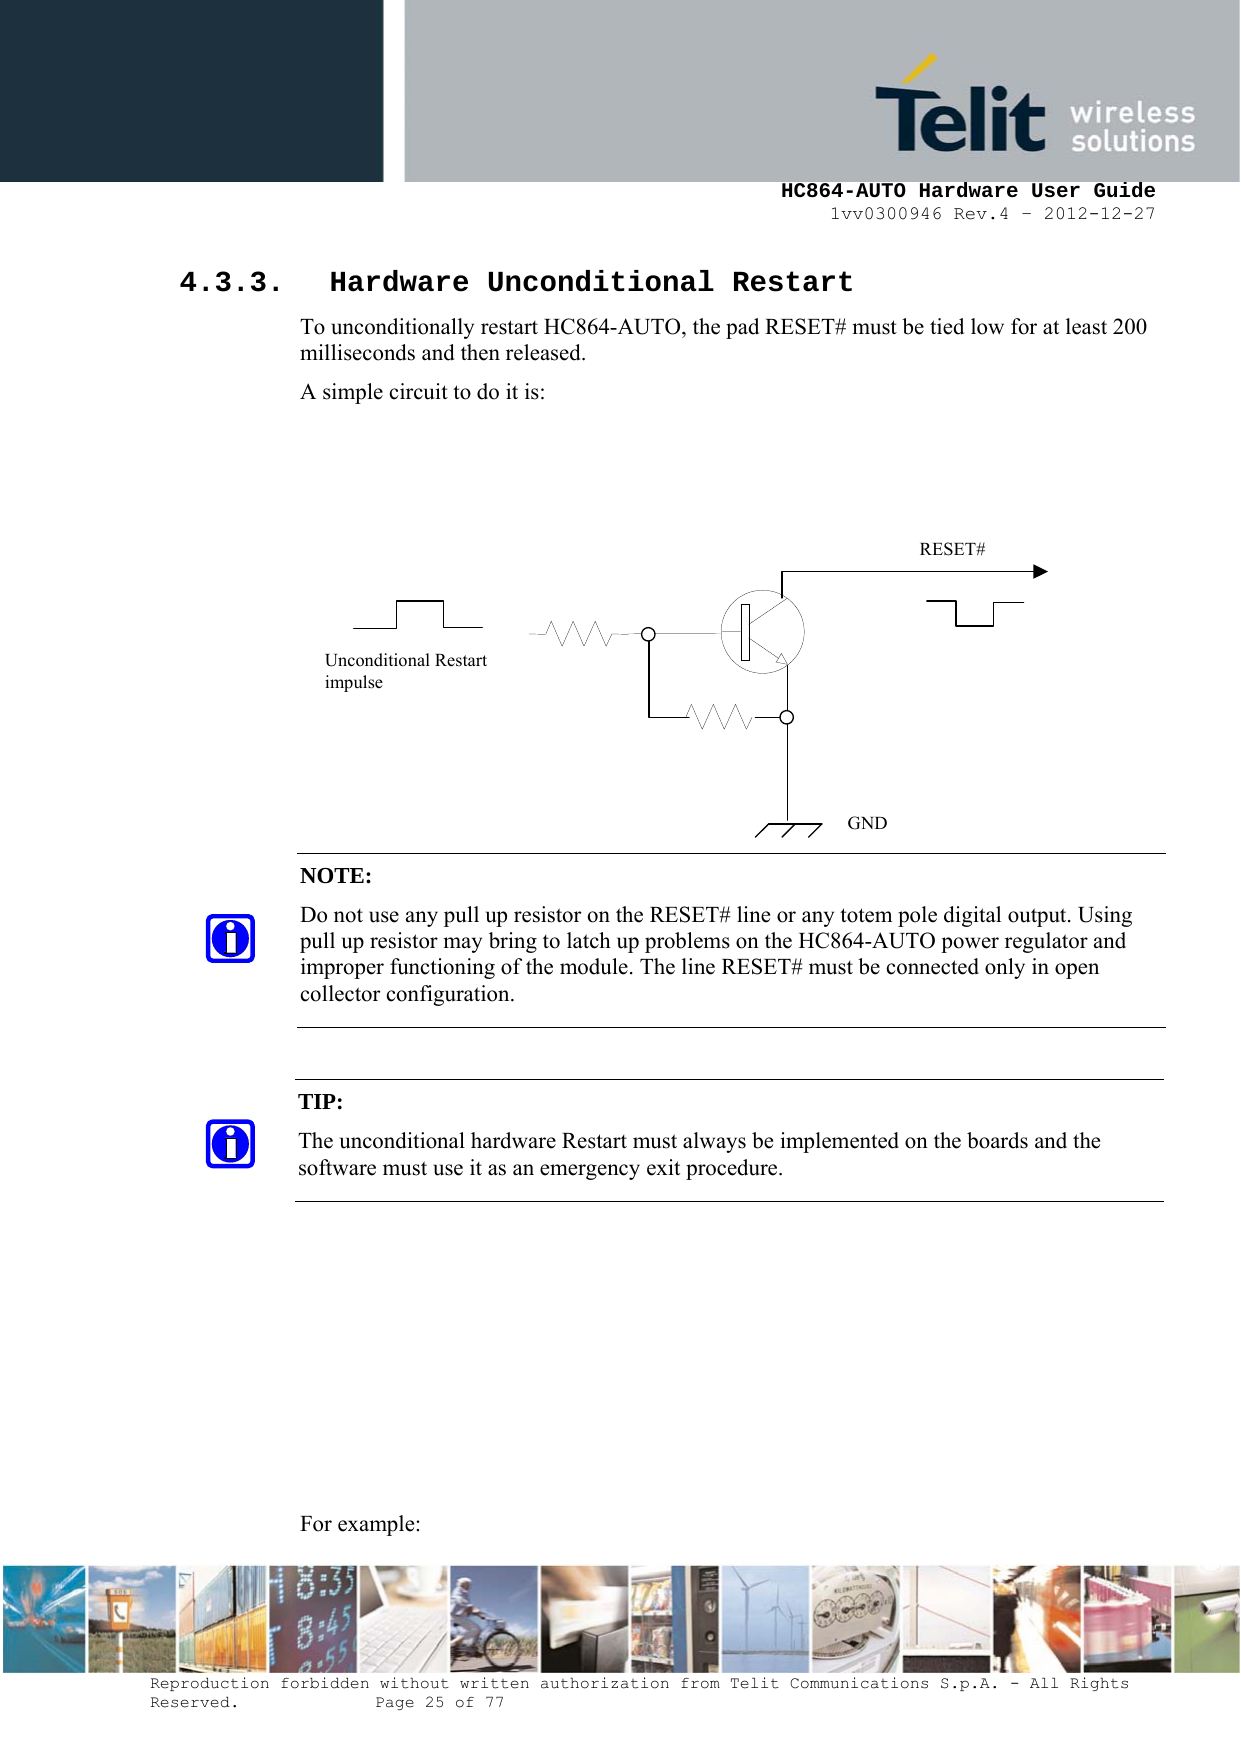     HC864-AUTO Hardware User Guide 1vv0300946 Rev.4 – 2012-12-27 Reproduction forbidden without written authorization from Telit Communications S.p.A. - All Rights Reserved.    Page 25 of 77  4.3.3. Hardware Unconditional Restart To unconditionally restart HC864-AUTO, the pad RESET# must be tied low for at least 200 milliseconds and then released. A simple circuit to do it is:                     For example: NOTE:  Do not use any pull up resistor on the RESET# line or any totem pole digital output. Using pull up resistor may bring to latch up problems on the HC864-AUTO power regulator and improper functioning of the module. The line RESET# must be connected only in open collector configuration. TIP:  The unconditional hardware Restart must always be implemented on the boards and the software must use it as an emergency exit procedure.    RESET# Unconditional Restart impulse   GND 